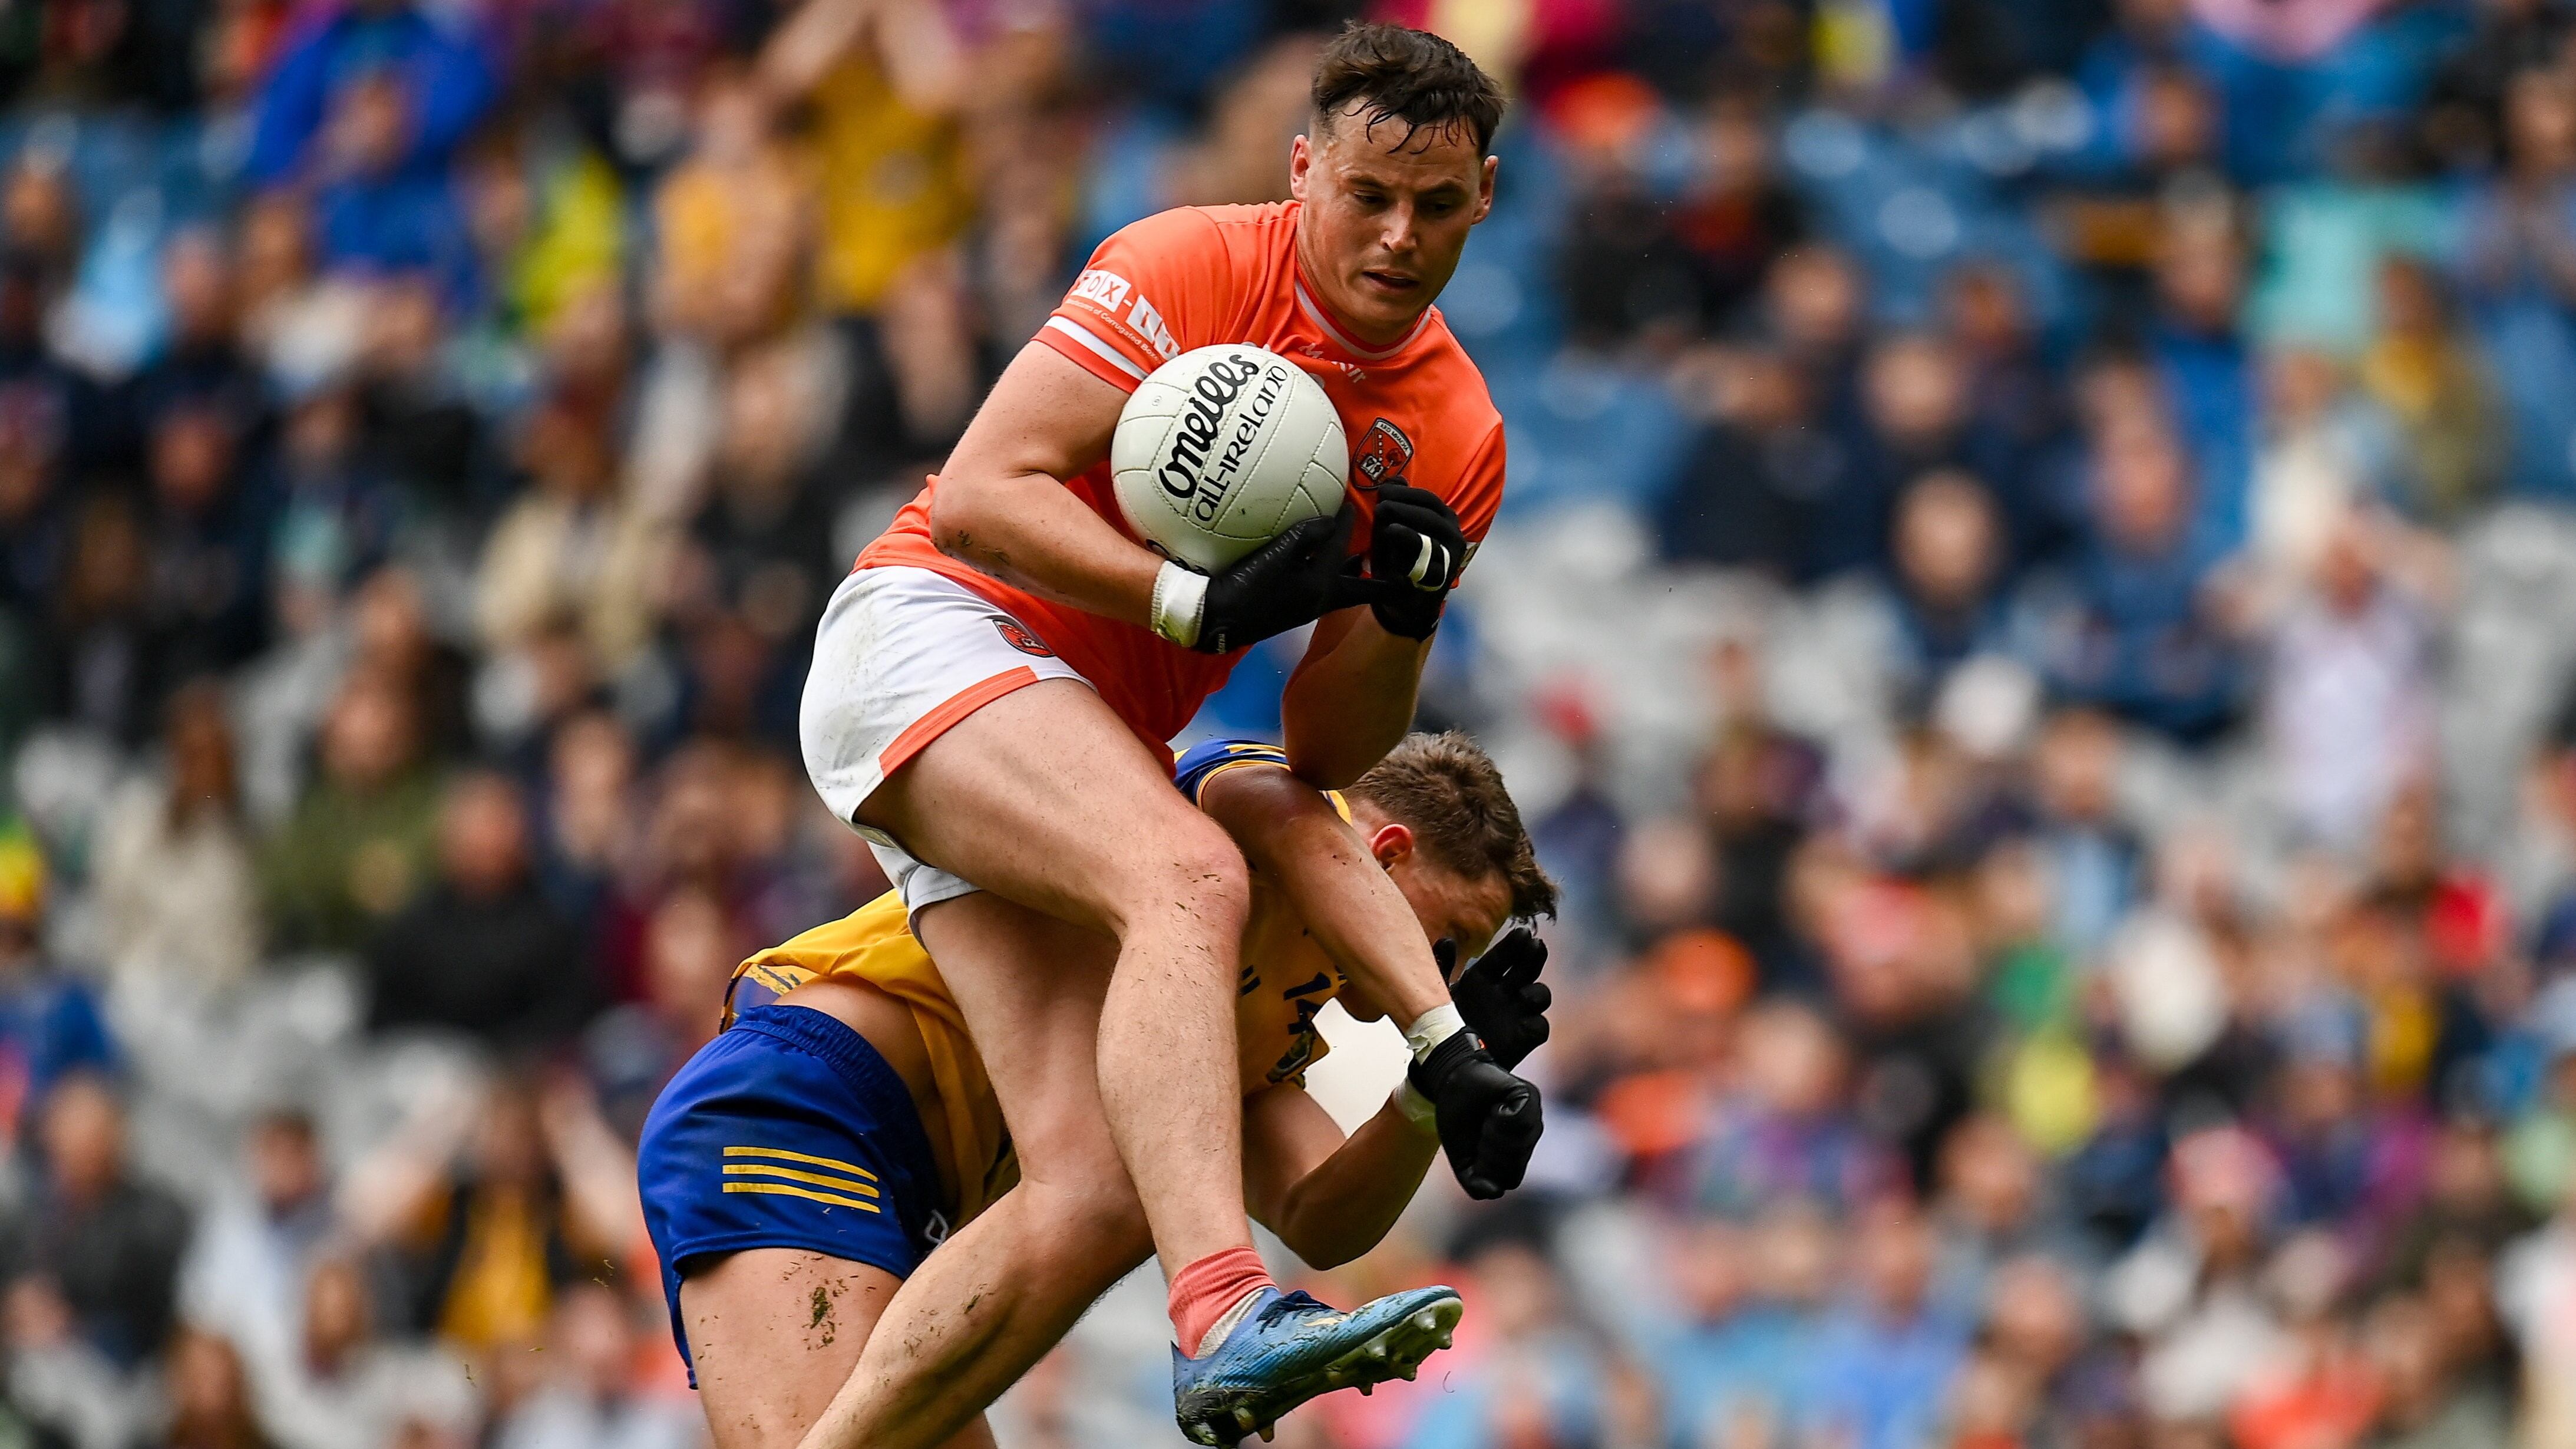 Armagh full-back Aaron McKay cuts out a Roscommon attack in the All-Ireland quarter-final. Picture: Sportsfile